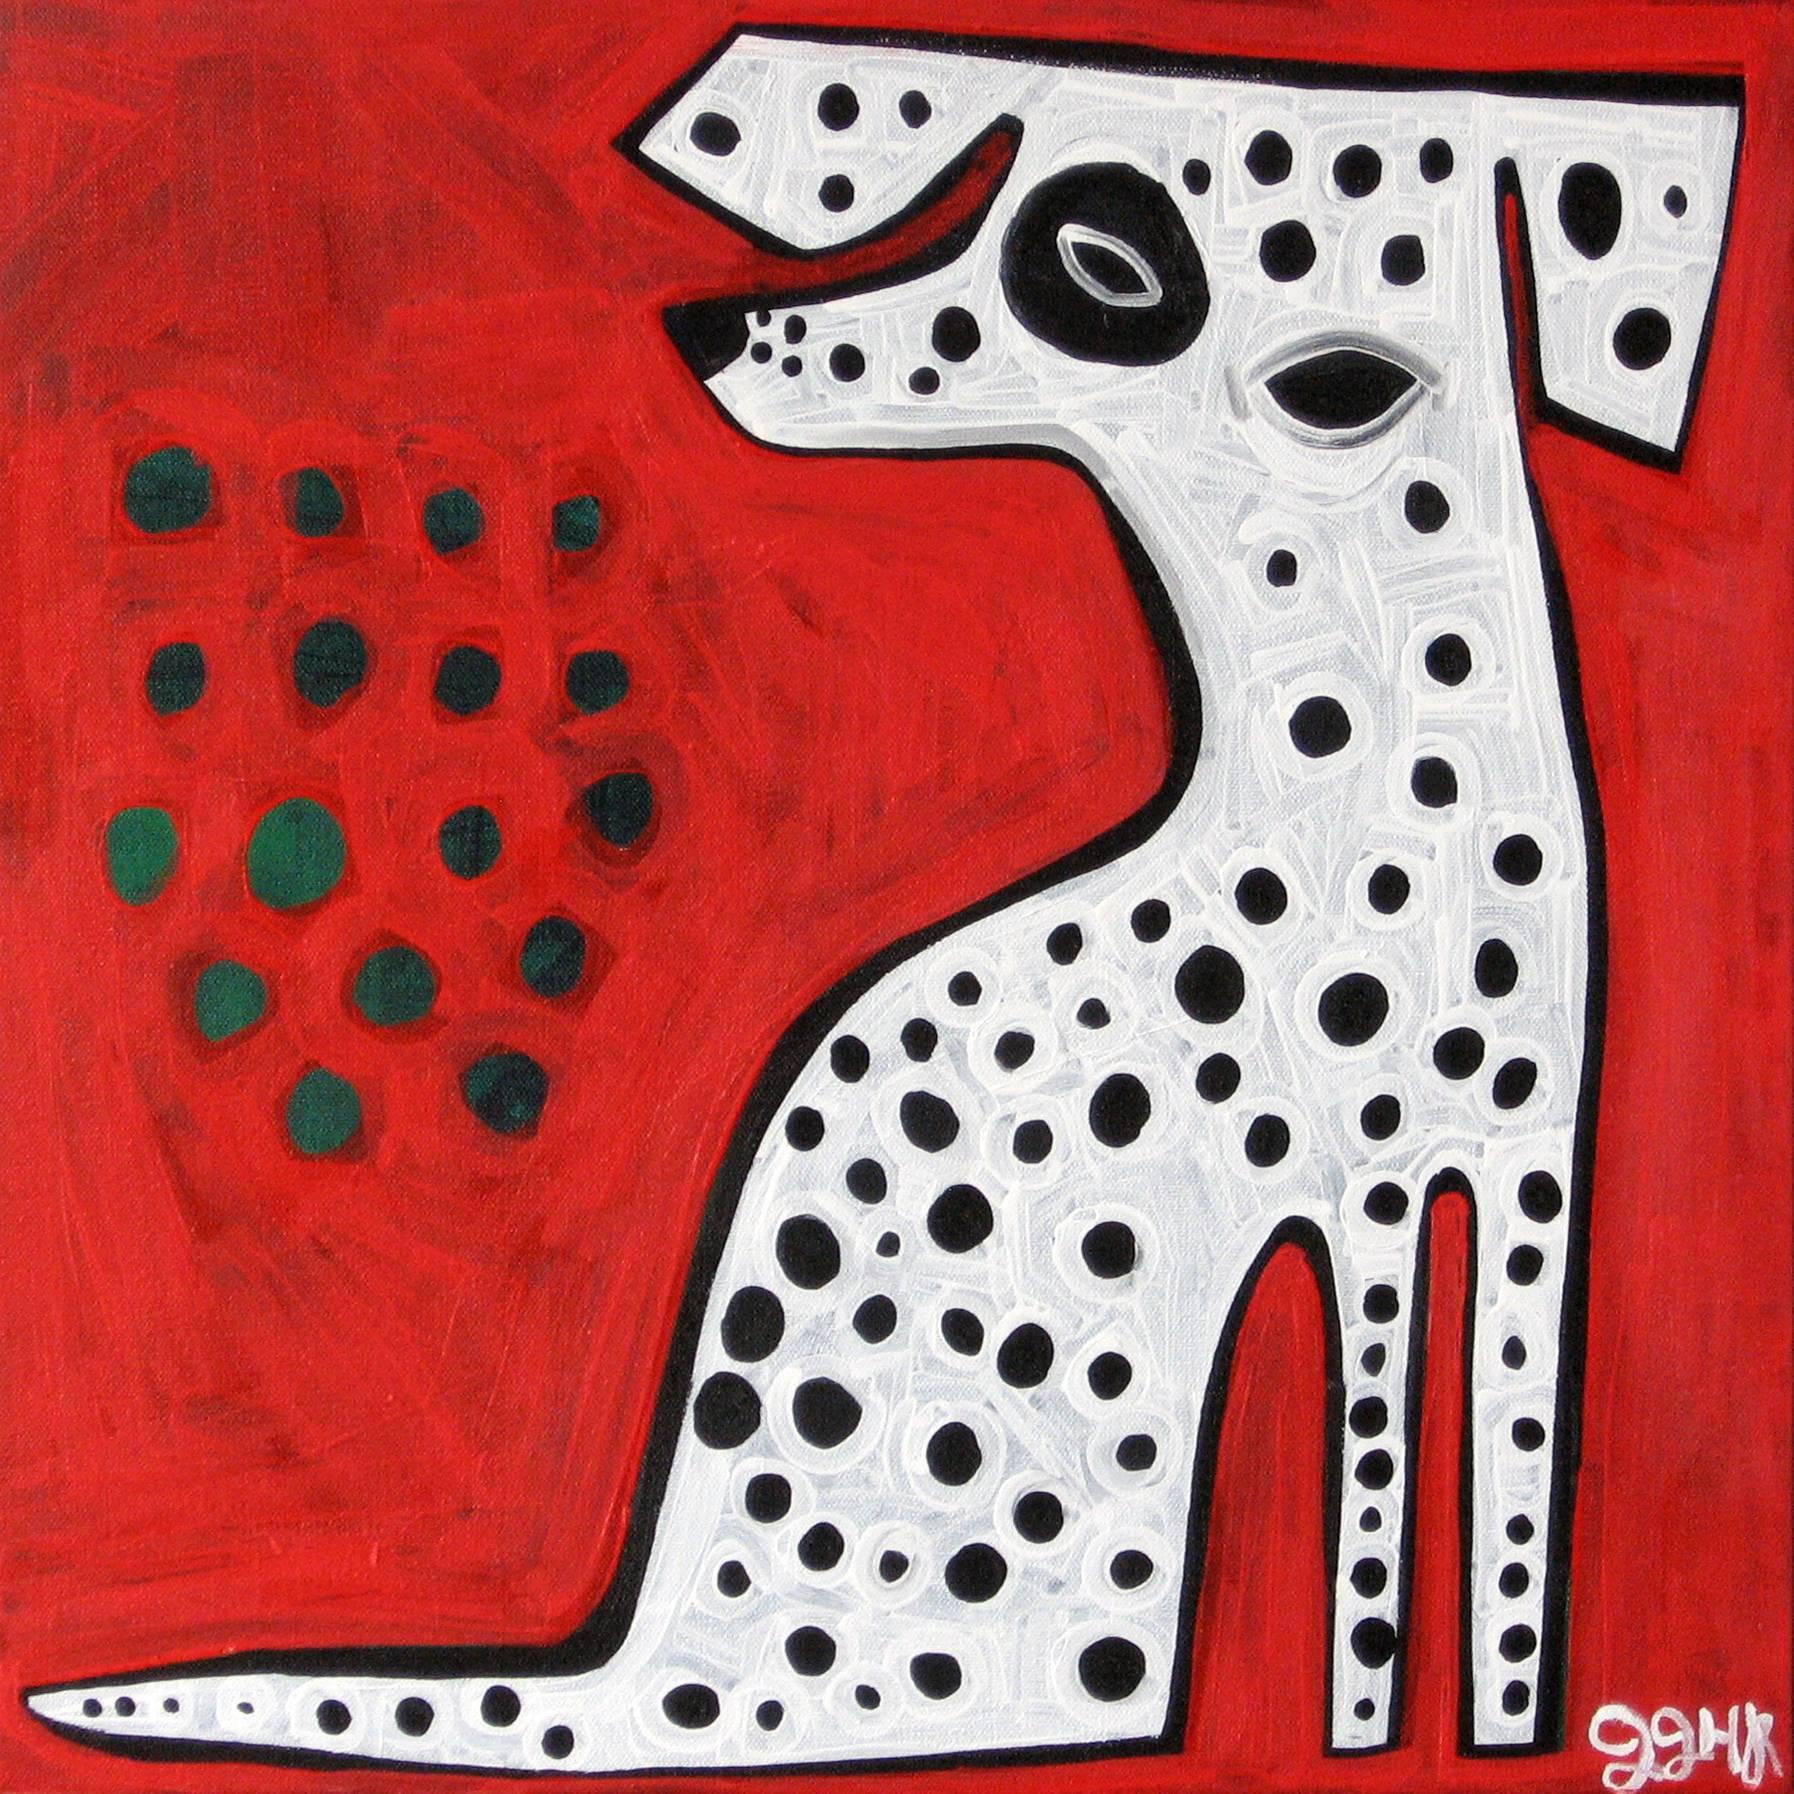 Jessica JH Roller Animal Painting - Dalmatian on Red